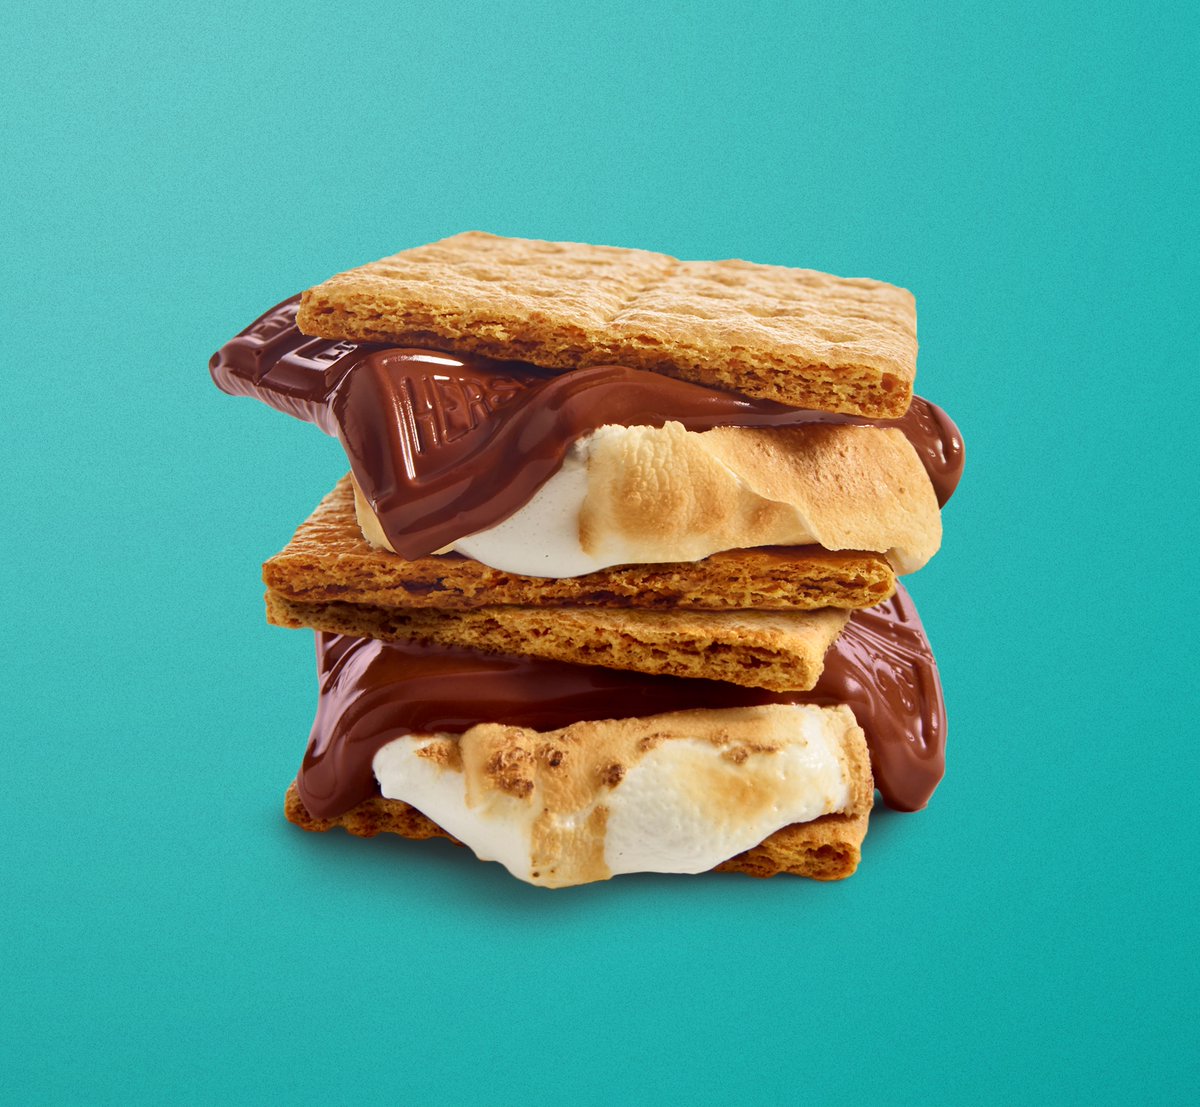 Warm, summer nights are here and that can only mean one thing – it’s S’mores season 😊 This year, we’ve teamed up with @pandoramusic to create custom #SmoresLife mixtapes to enjoy while making your favorite summer dessert. #HeartwarmingTheWorld #Smores hersheyland.com/smores